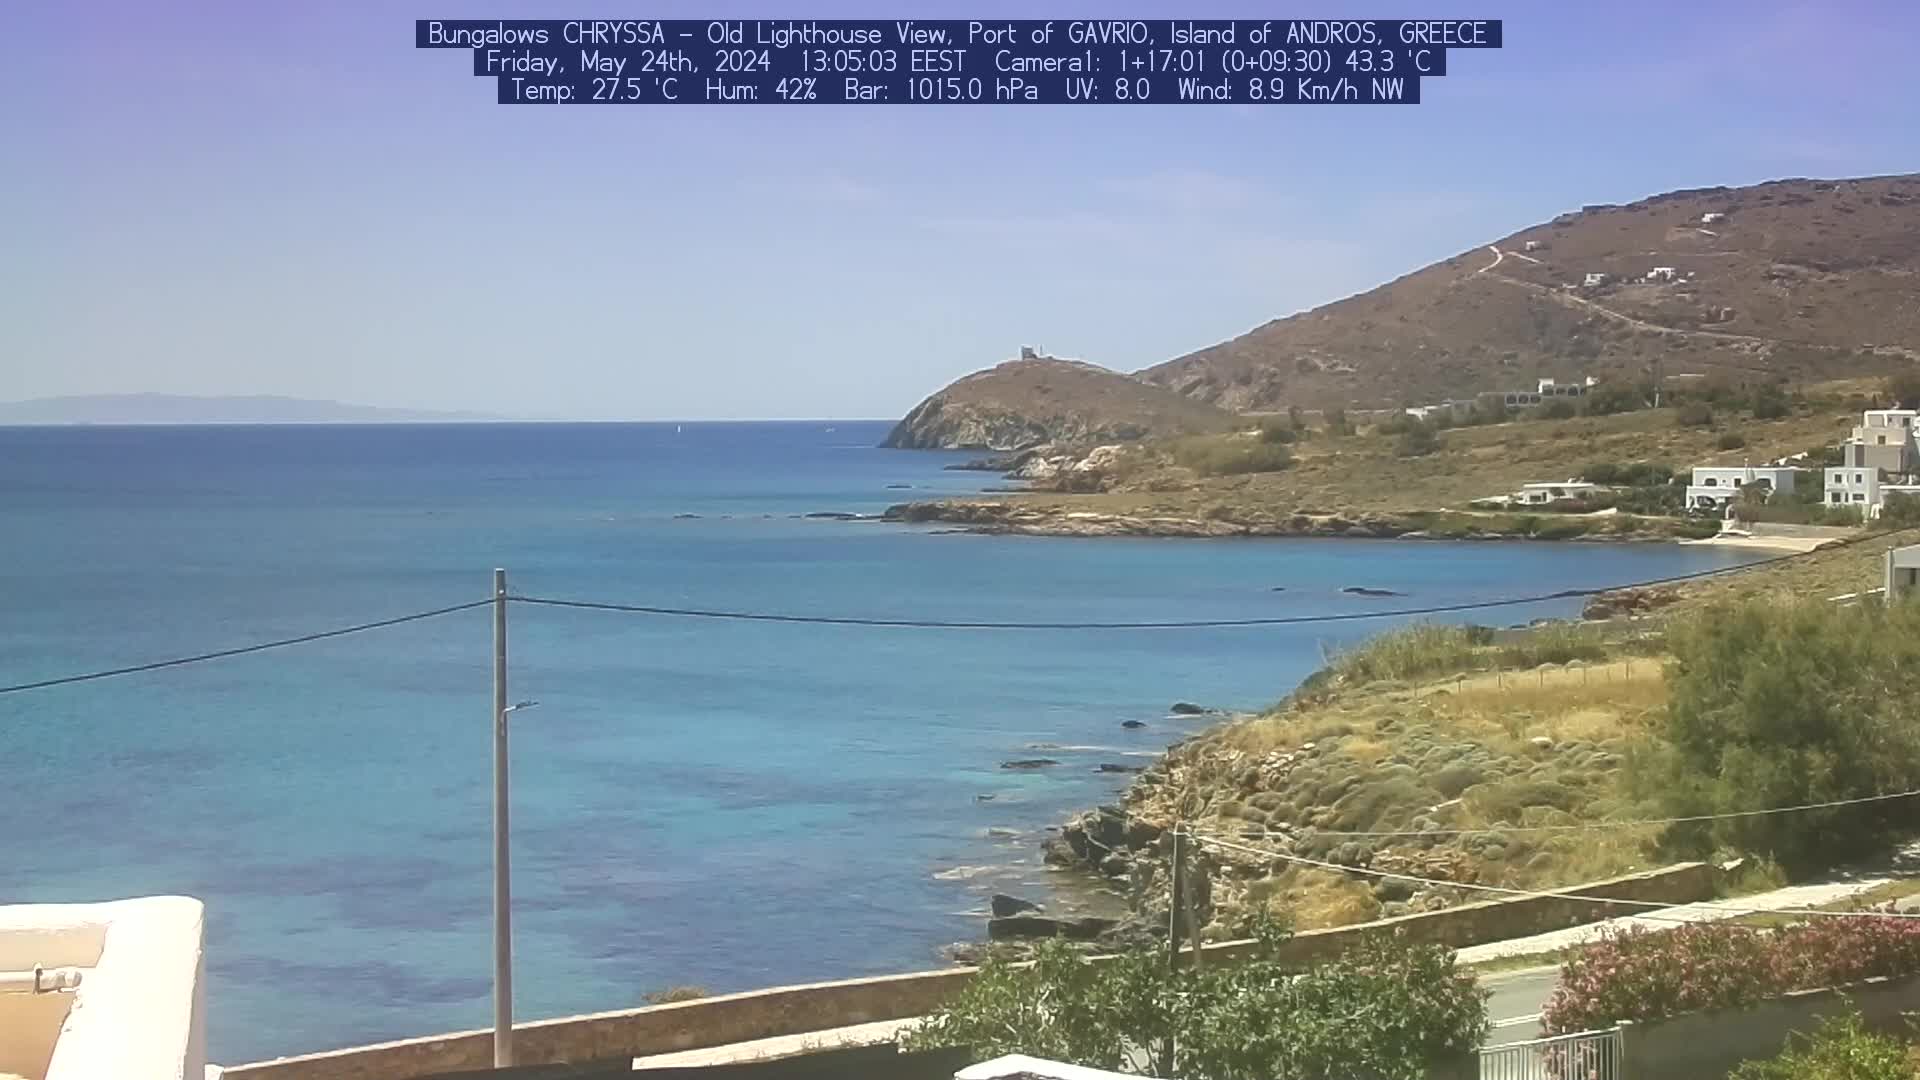 Gavrio (Andros) Wed. 13:05